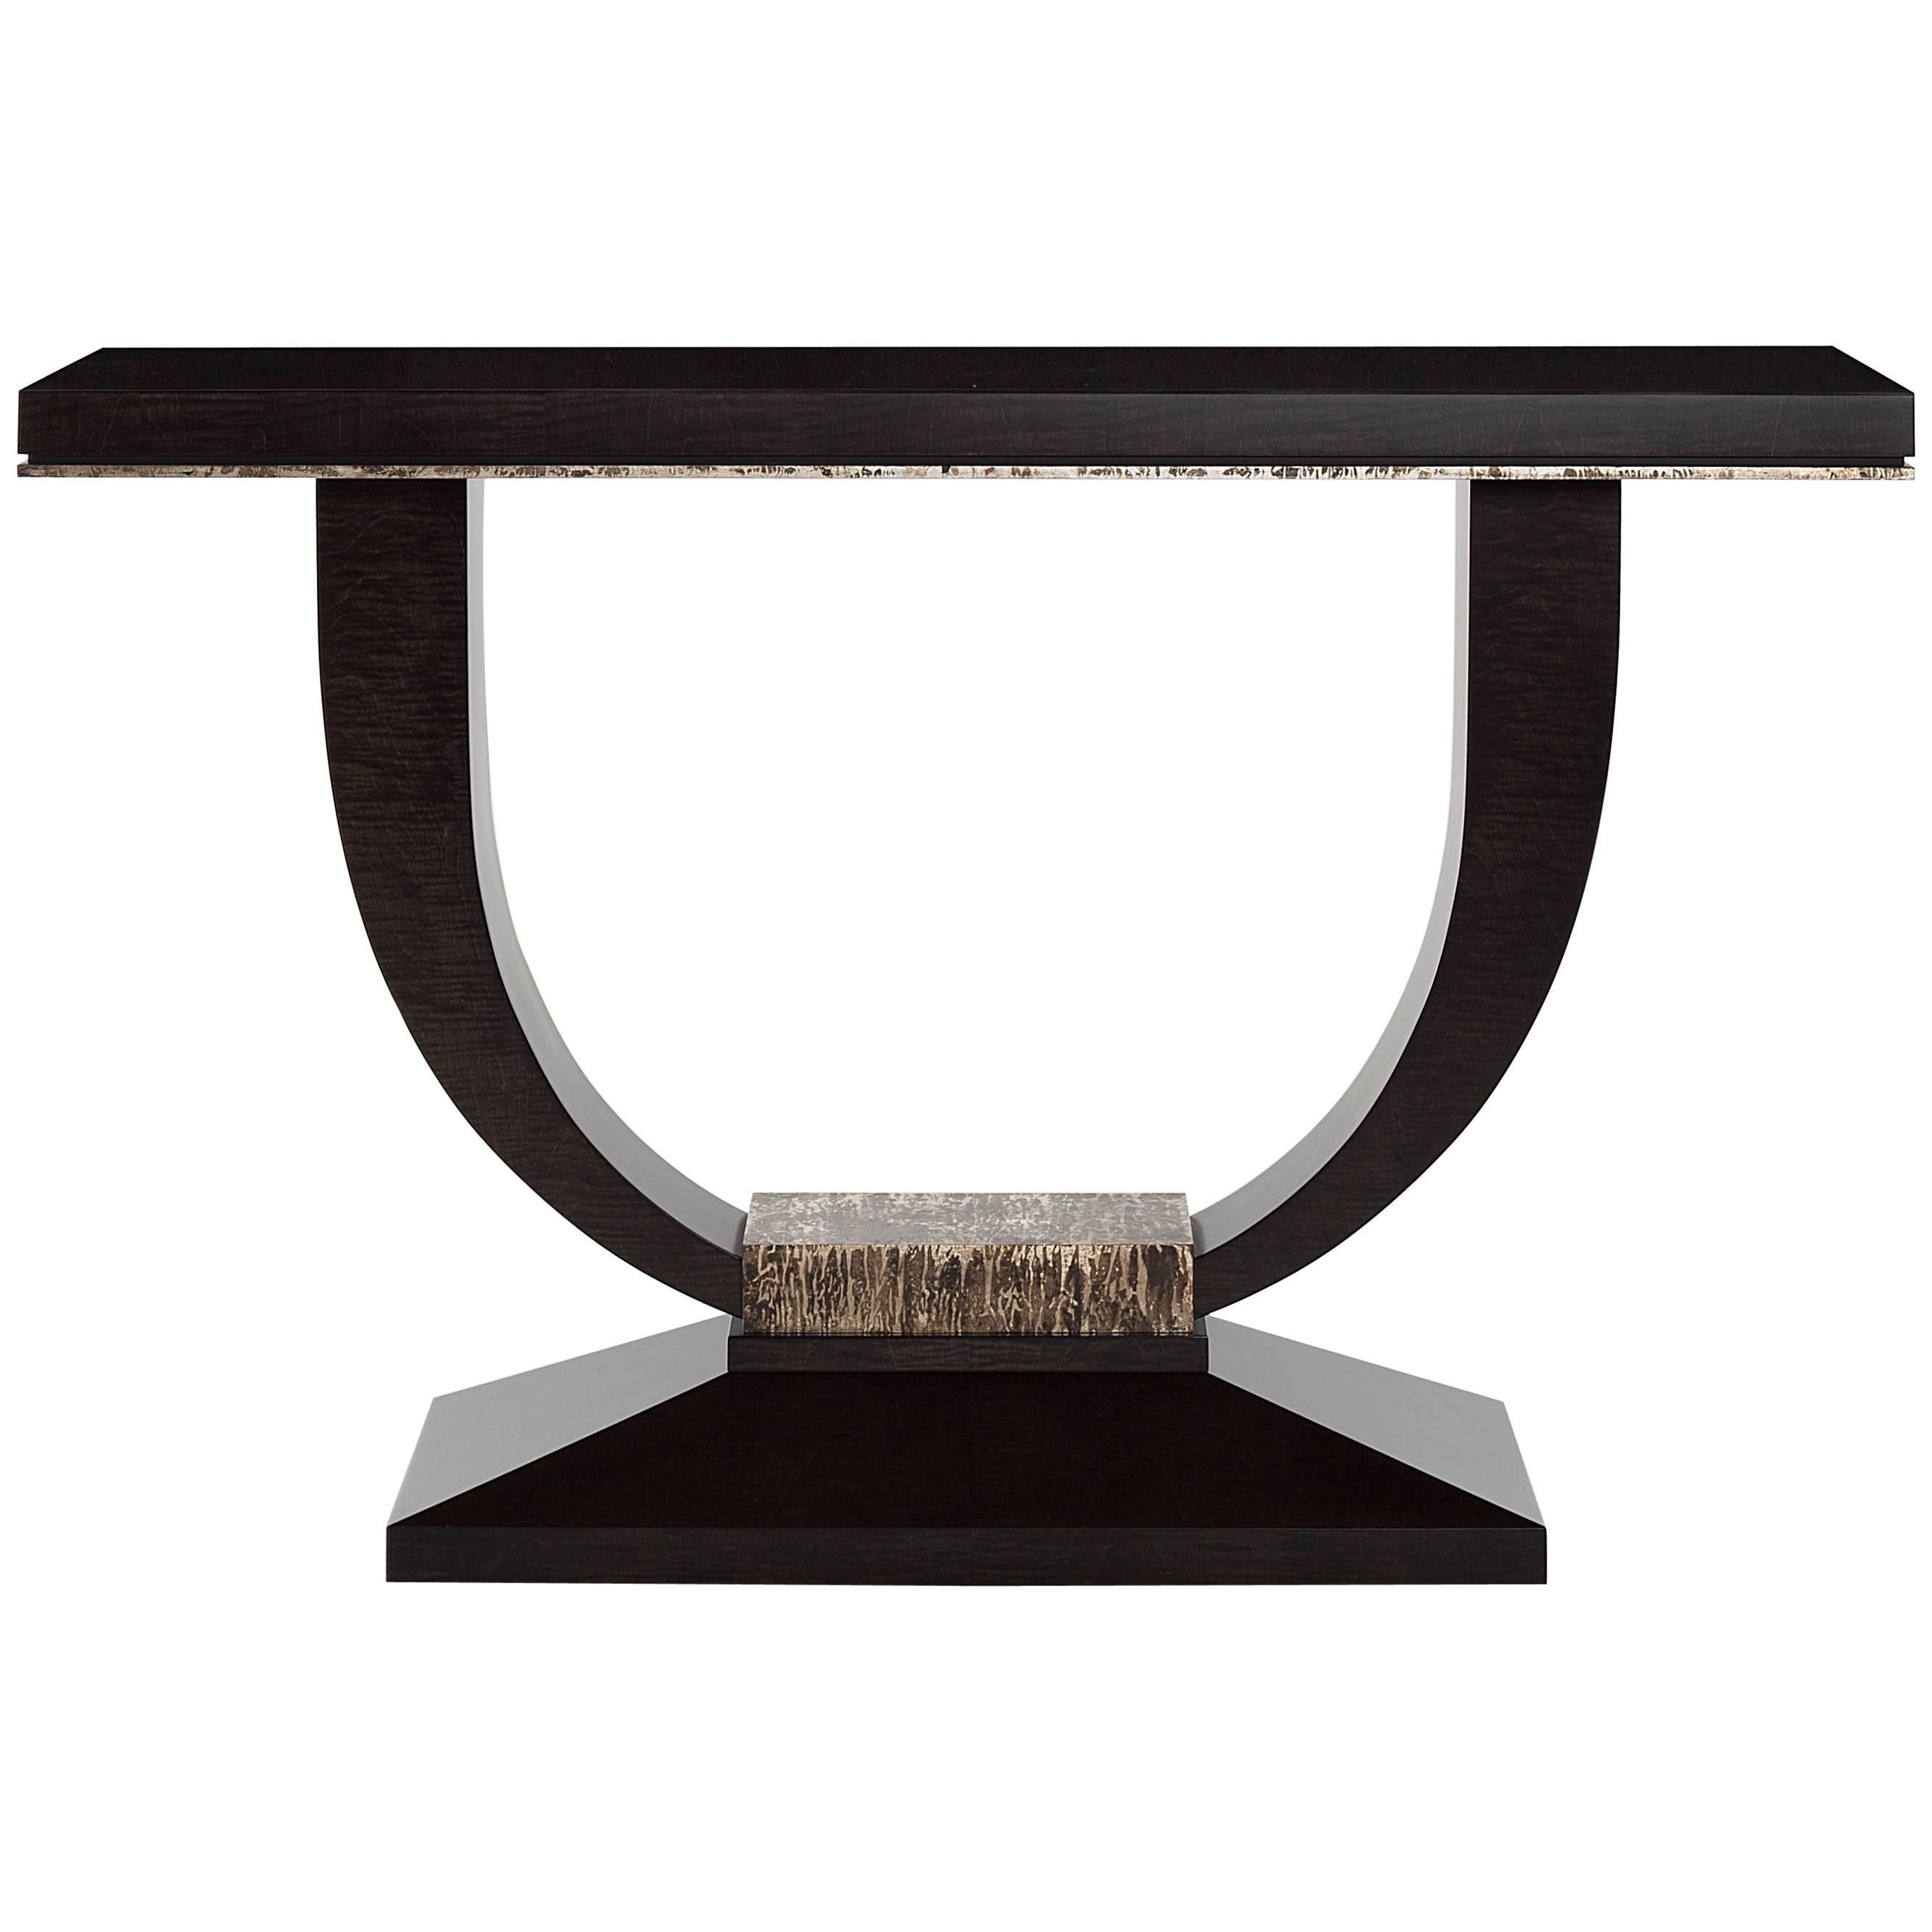 Davidson's Art Deco, Rectangular Albany Console, in Sycamore Black, Silver Leaf